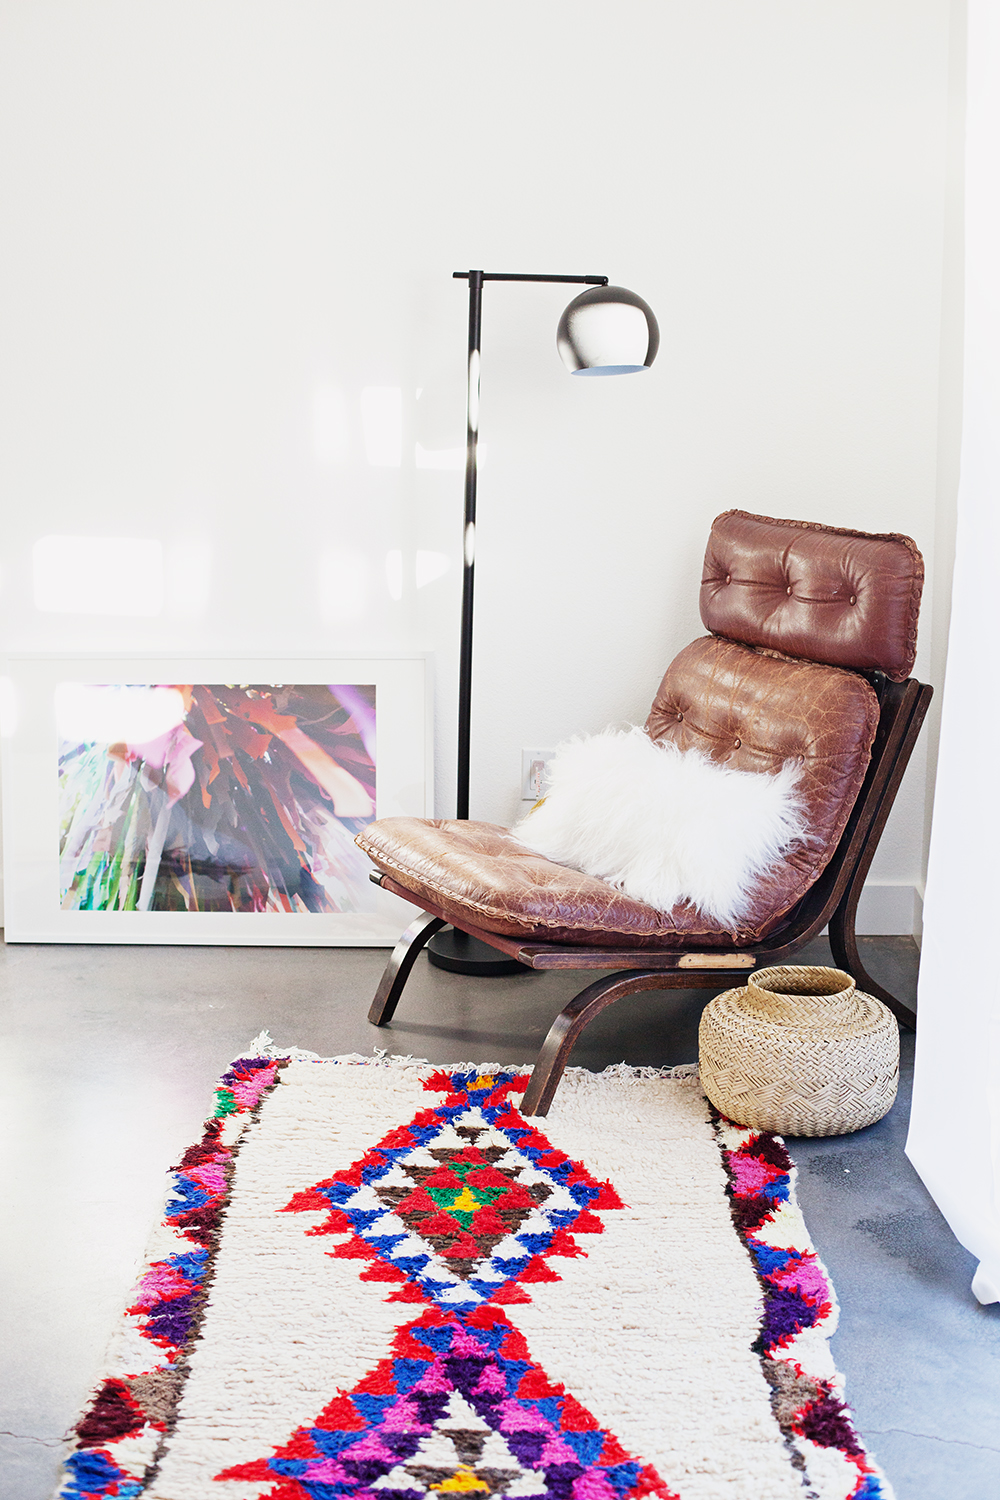 Photo print is from  Kelly Christine ; chair found on Offer Up, Rug found on Etsy, lamp is from Target, sheepskin pillow from Nordstrom Rack, basket thrifted